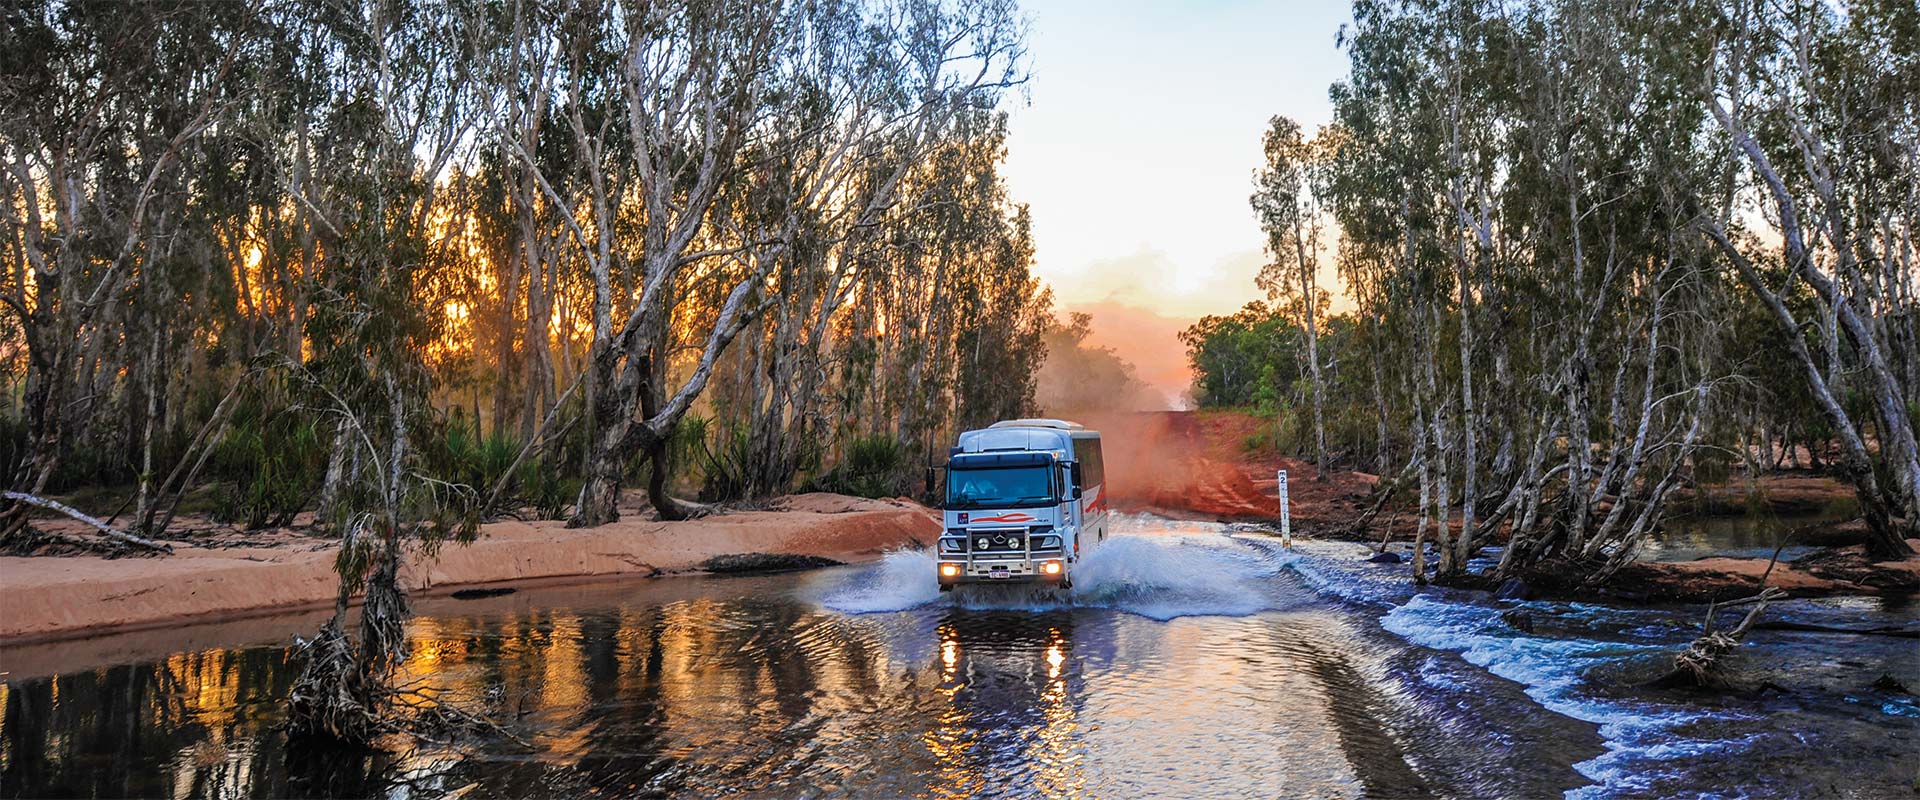 4WD vehicle crossing river surrounded by red earth and gum trees, WA